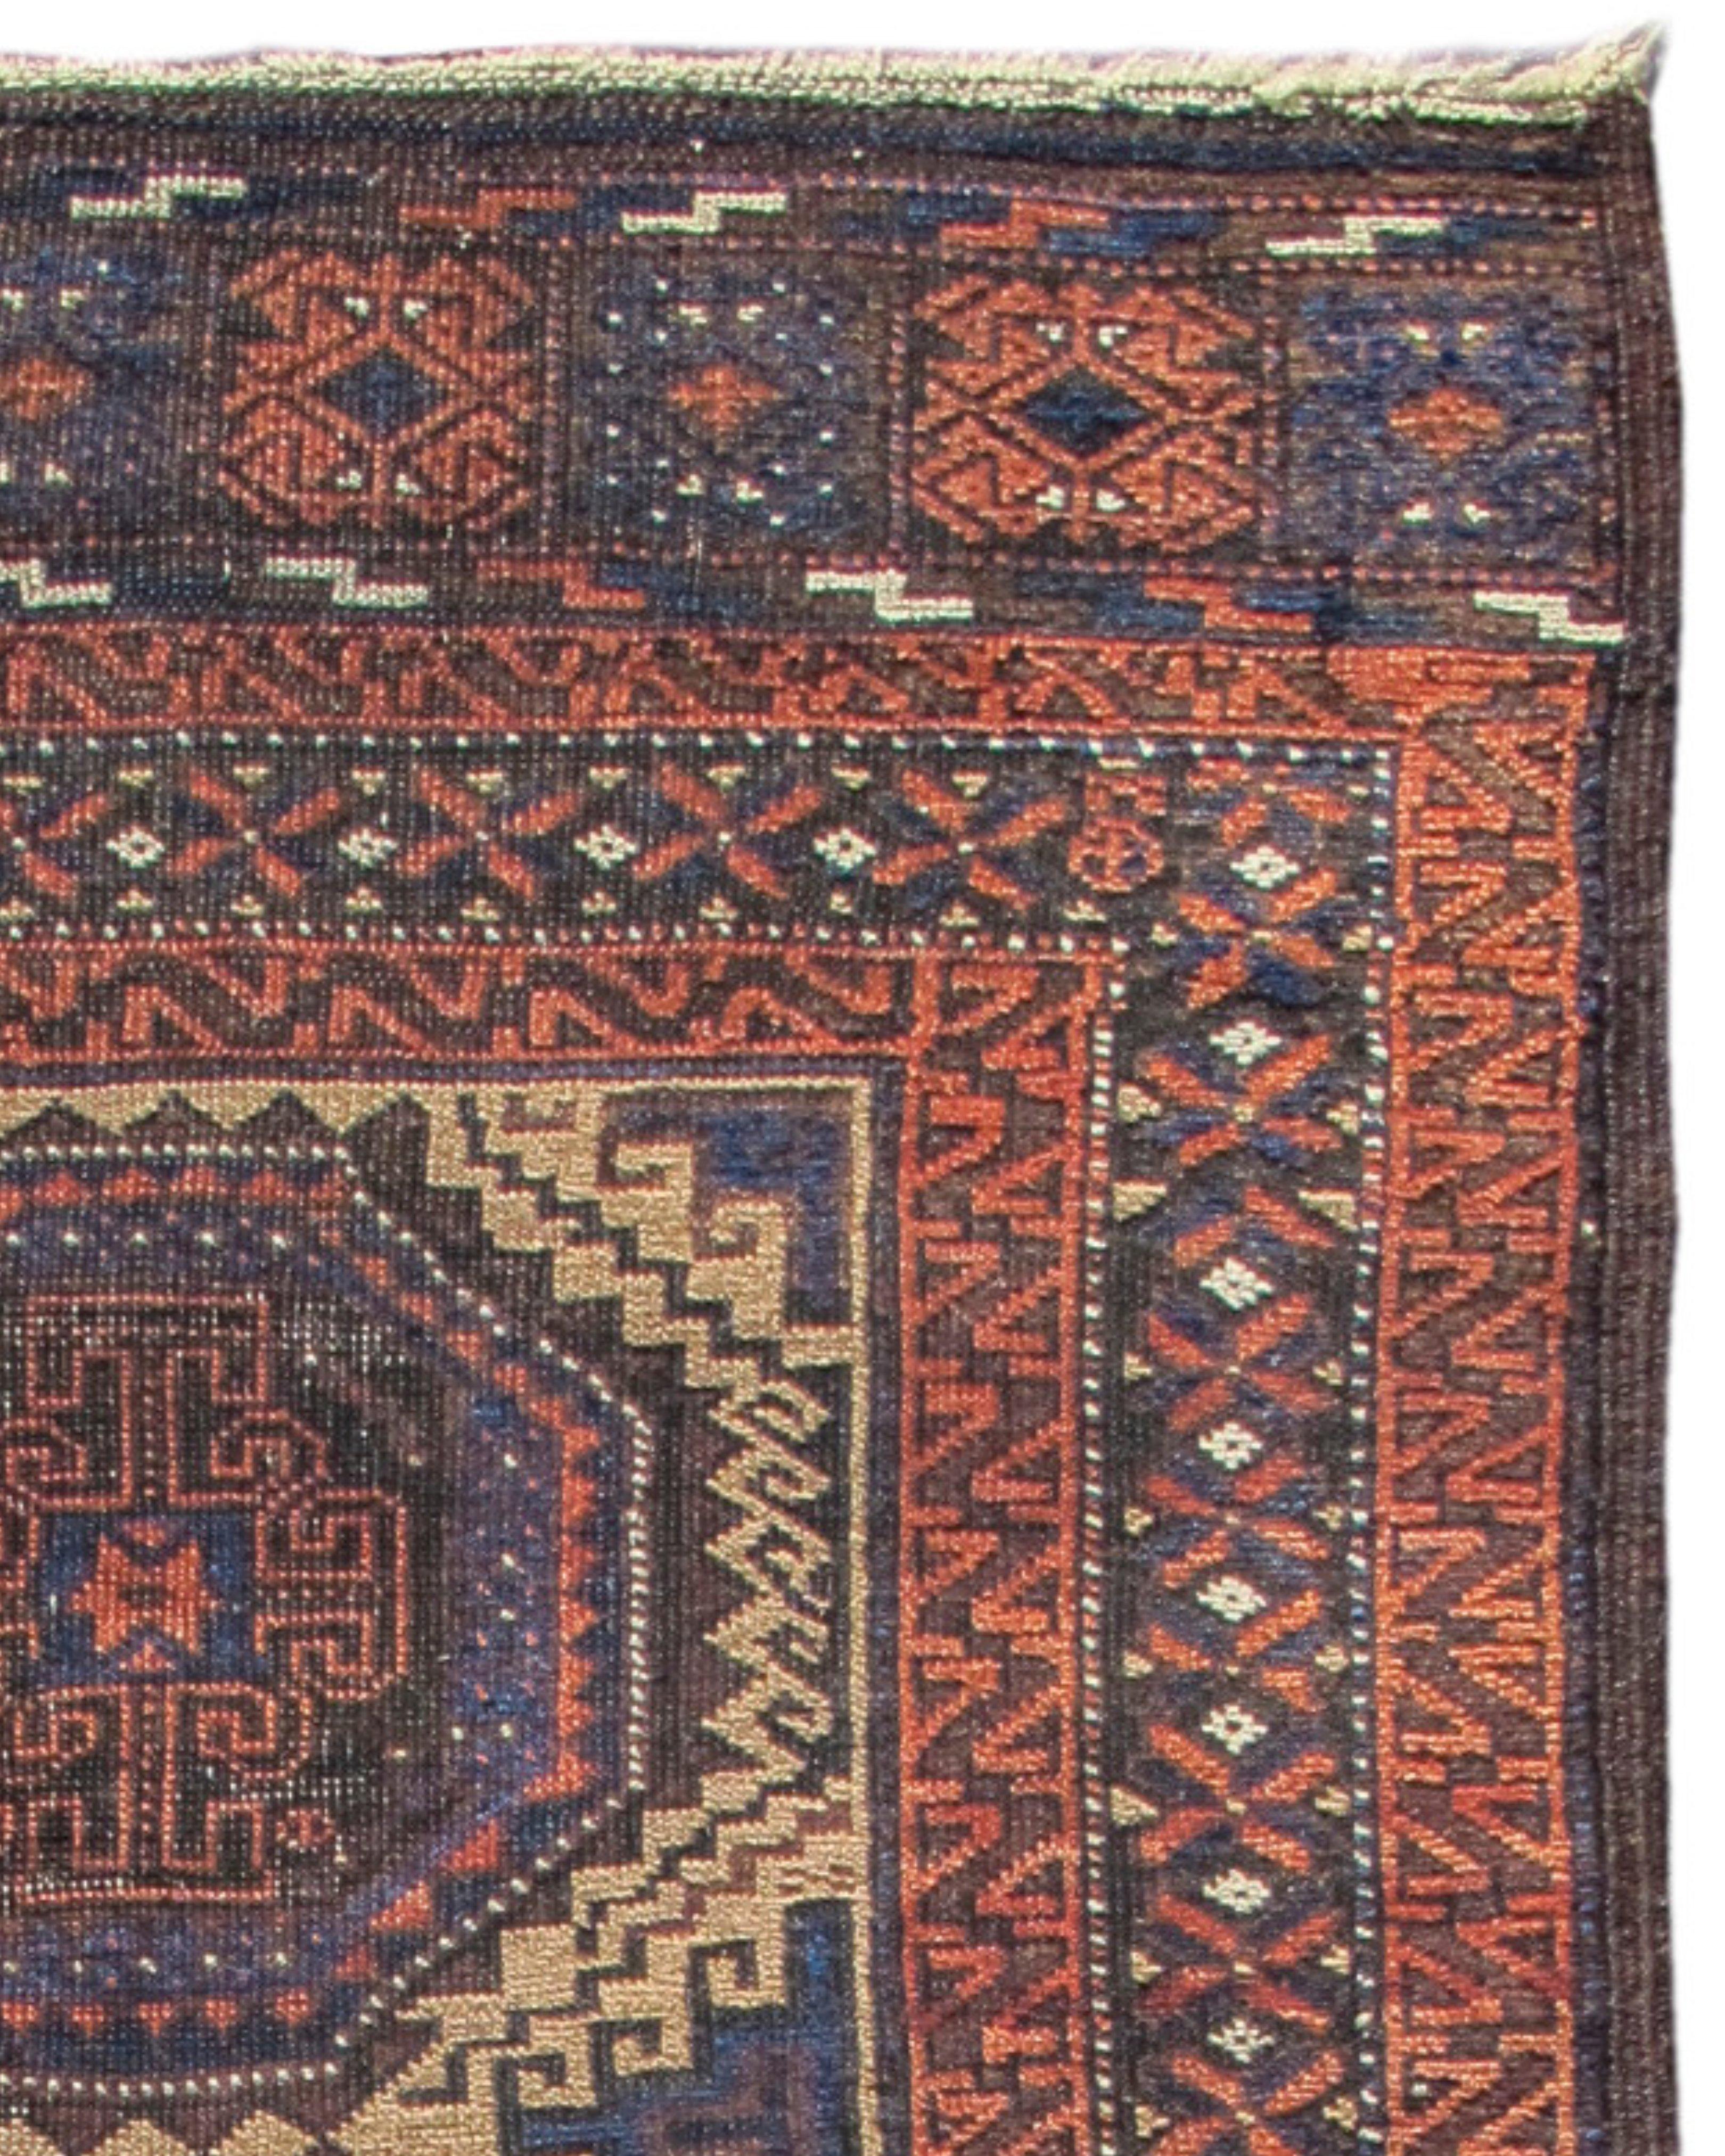 Baluch rug, Late 19th Century

Additional Information:
Dimensions: 2'7